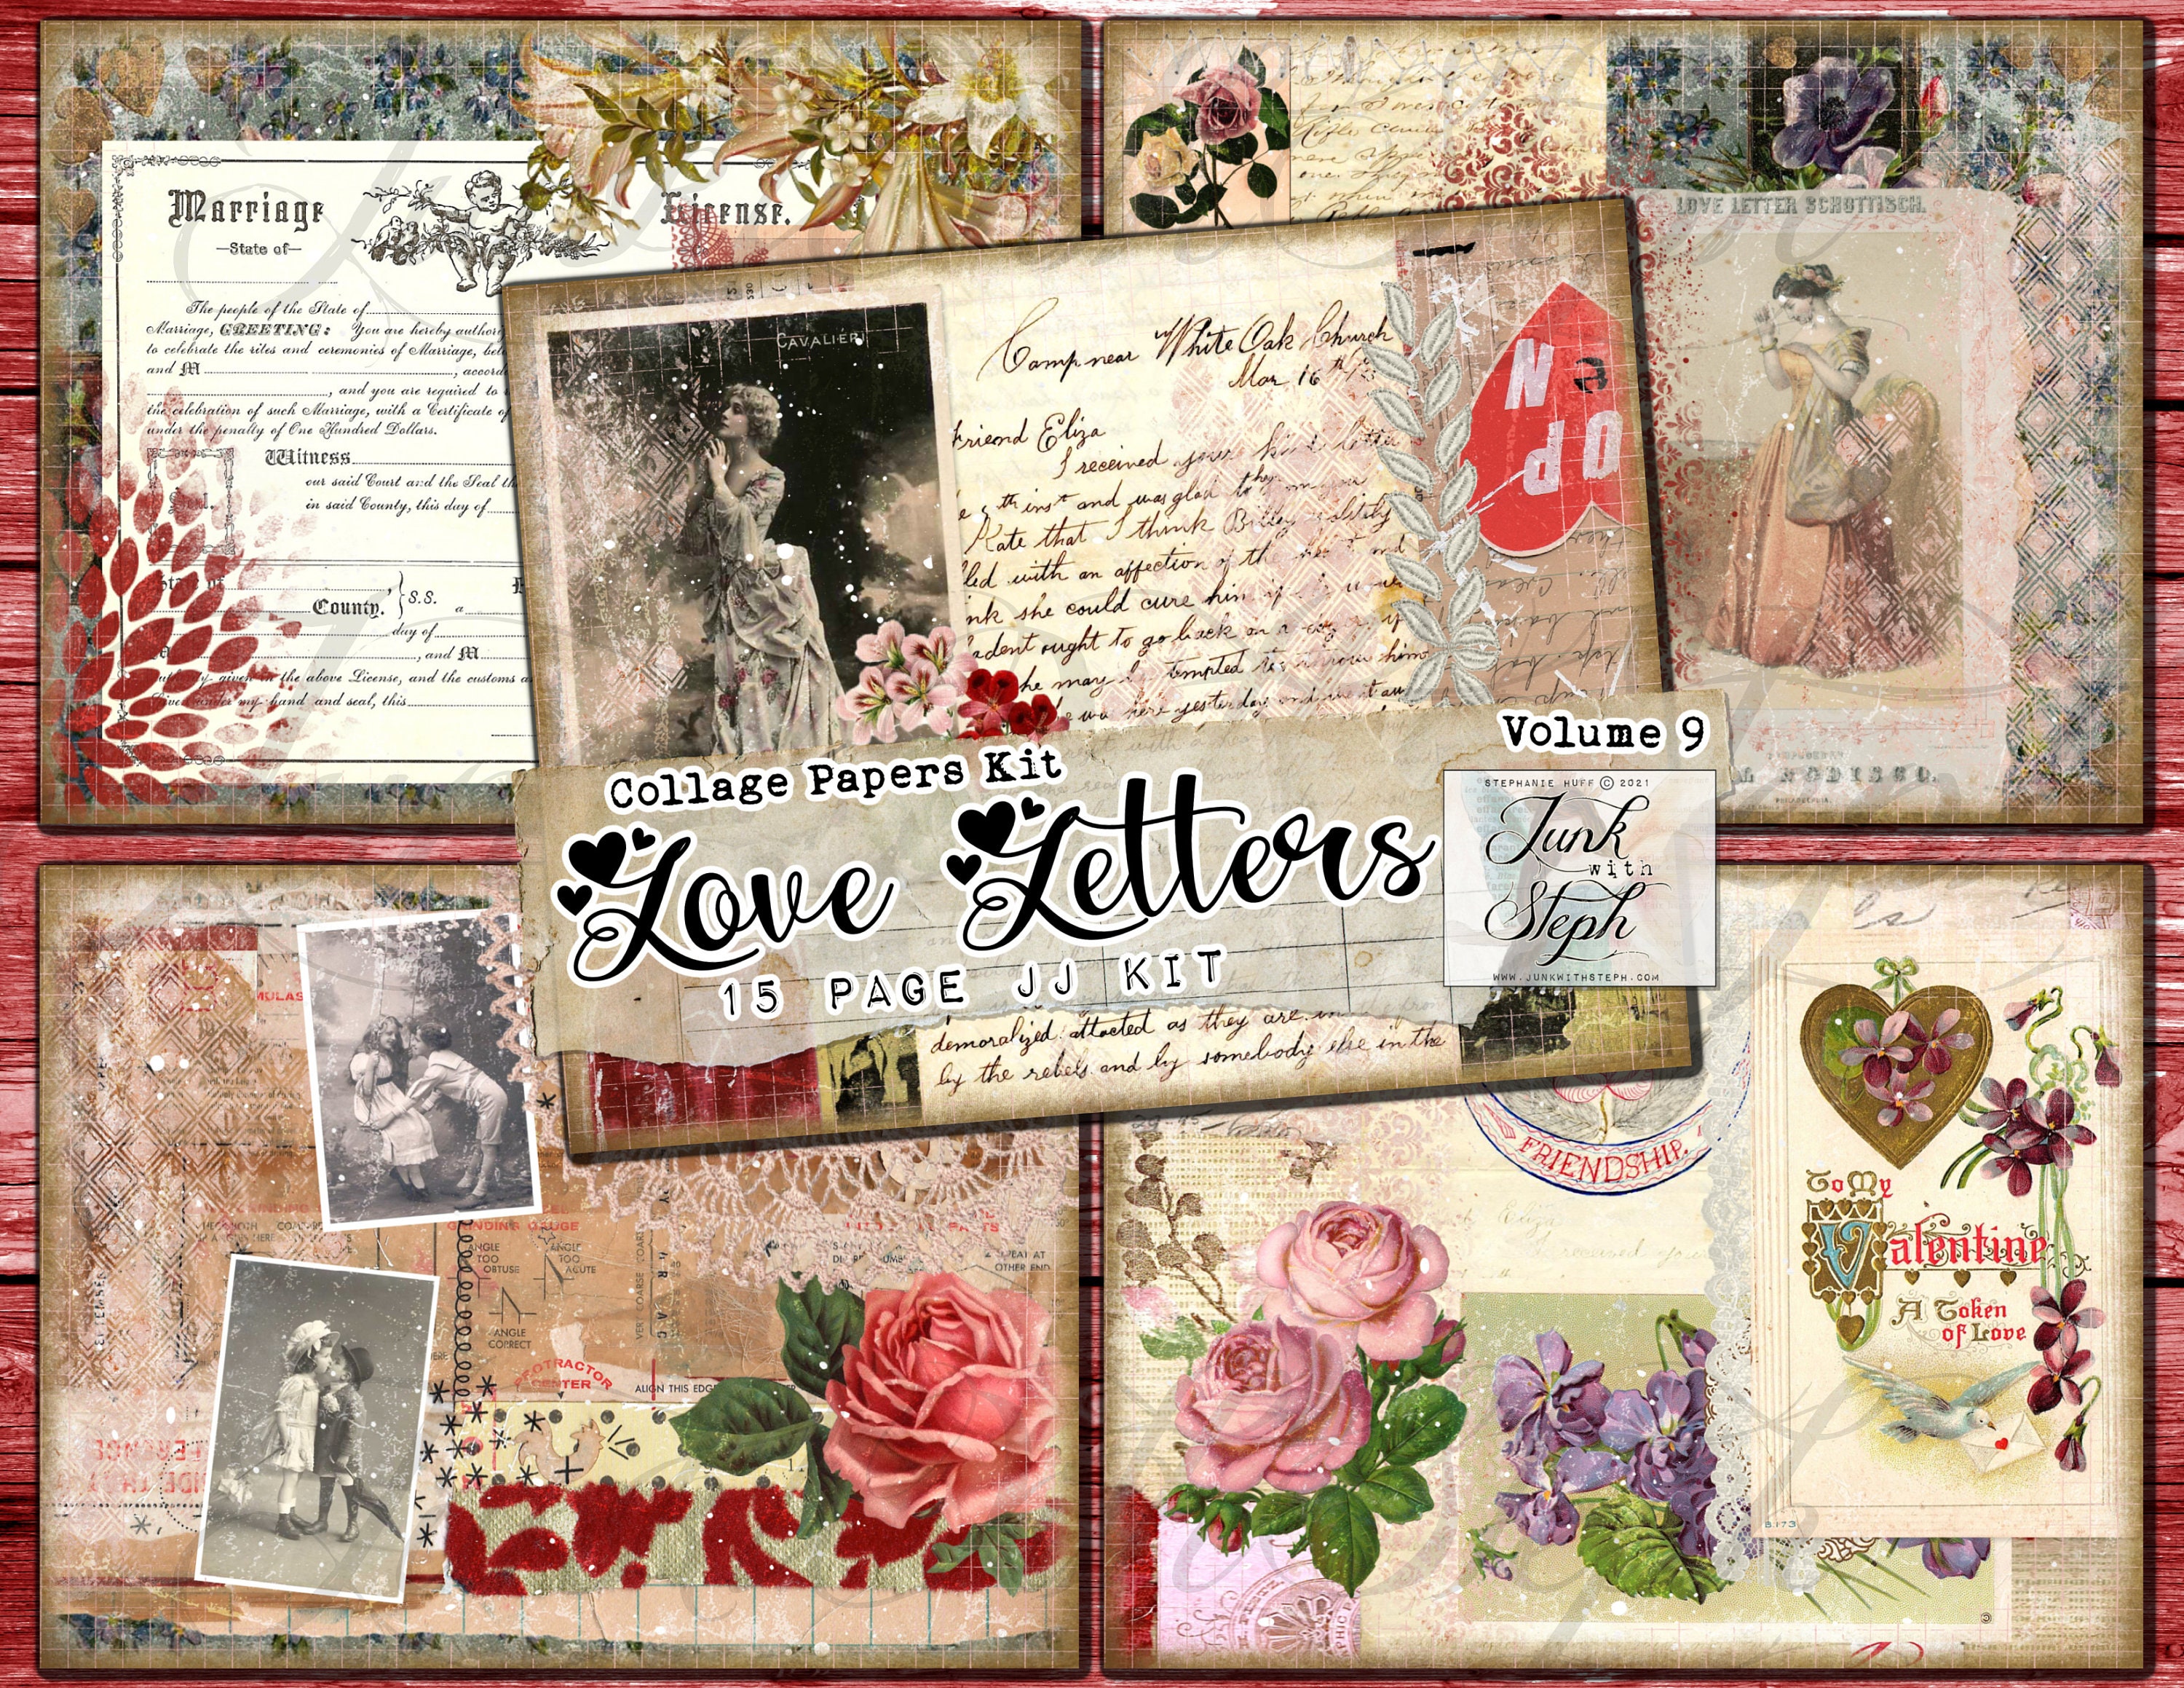 Collage Papers Kit: Vol. 9 love Letters Highly Detailed Tickets